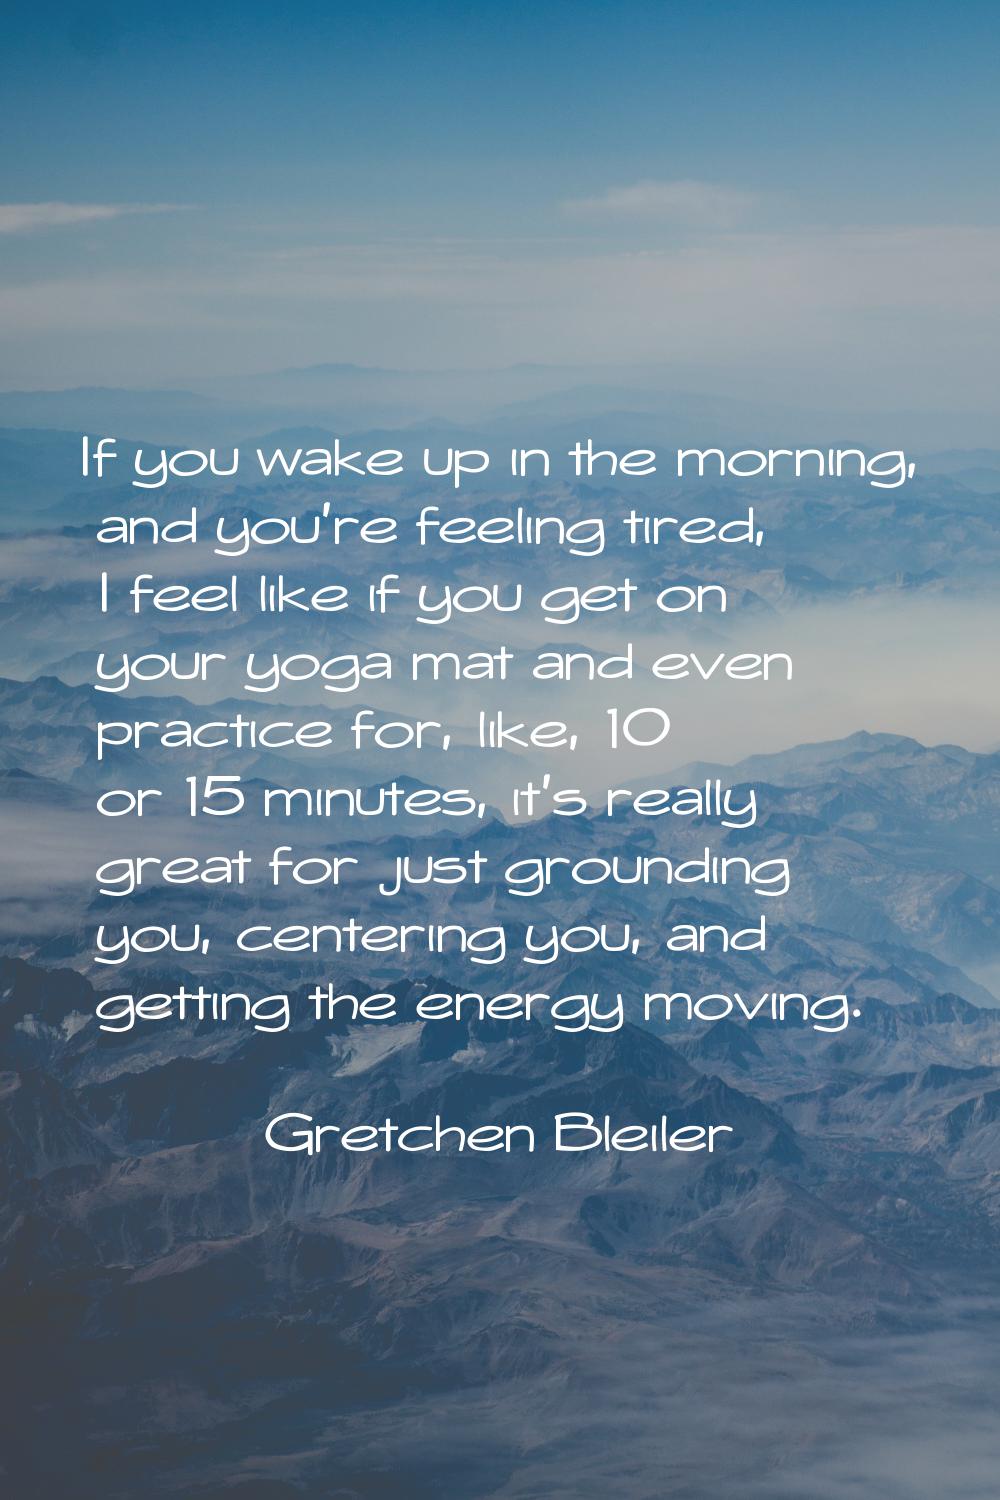 If you wake up in the morning, and you're feeling tired, I feel like if you get on your yoga mat an